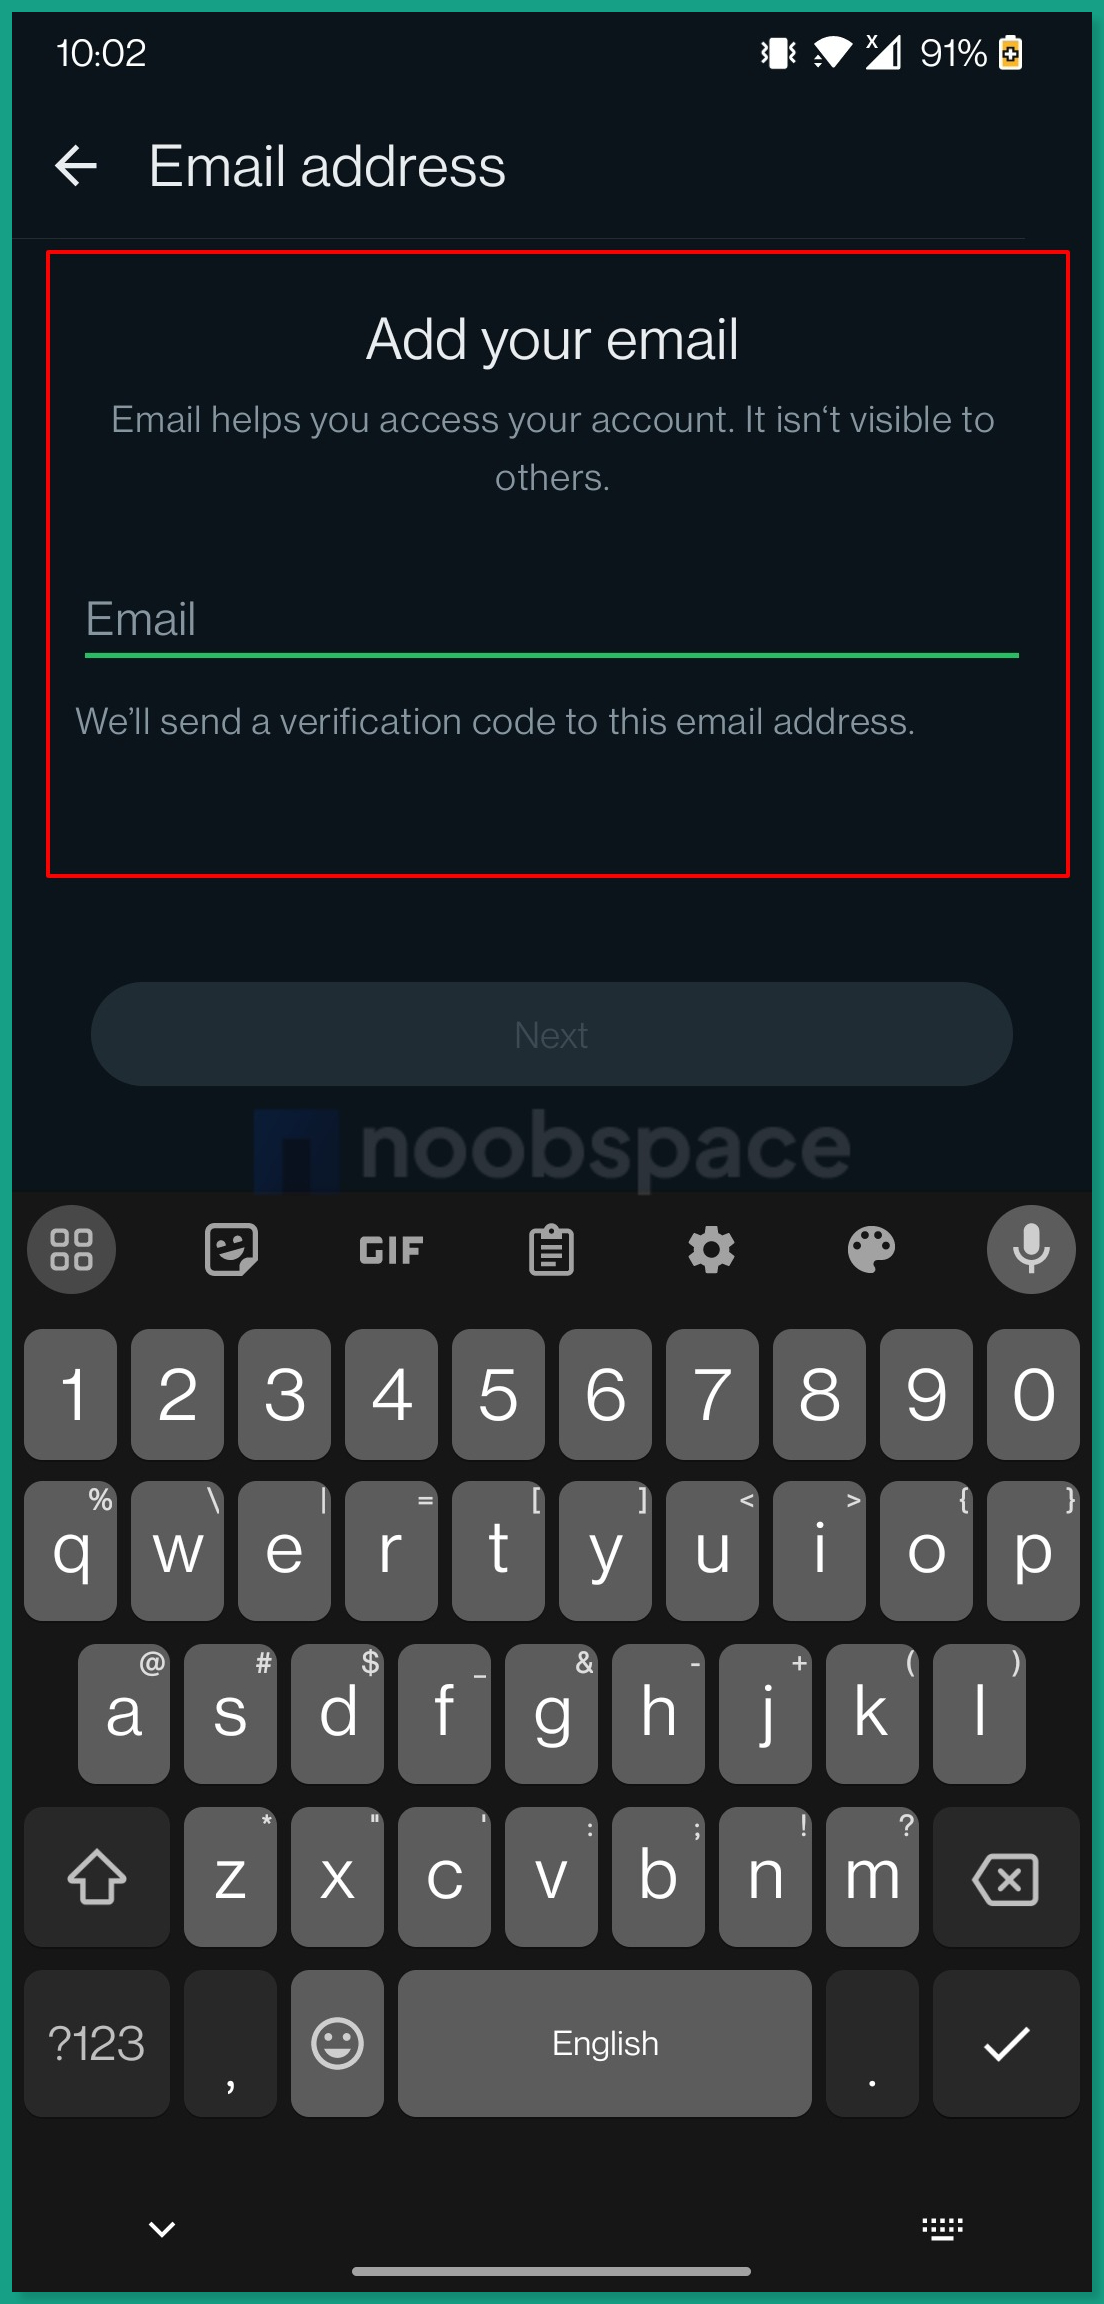 Adding an email address to WhatsApp